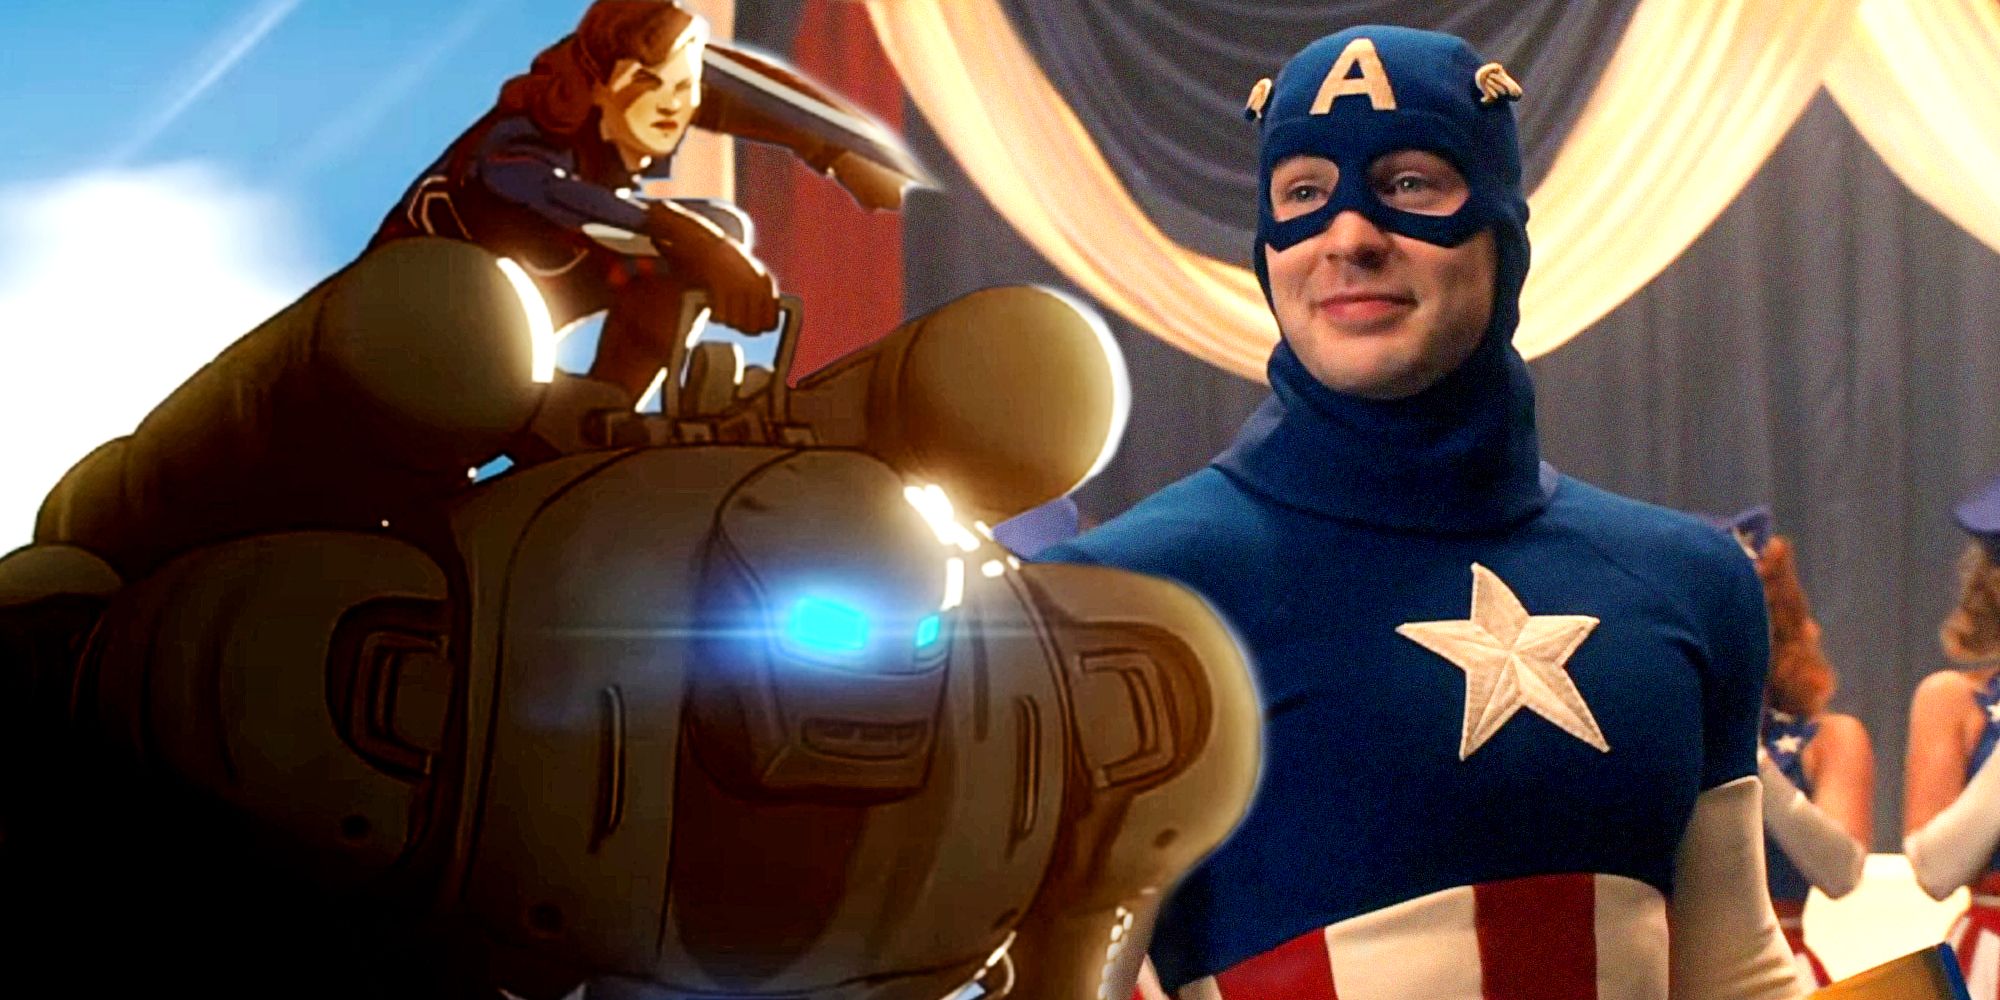 Every What If Episode 1 Scene Compared To Captain America The First Avenger